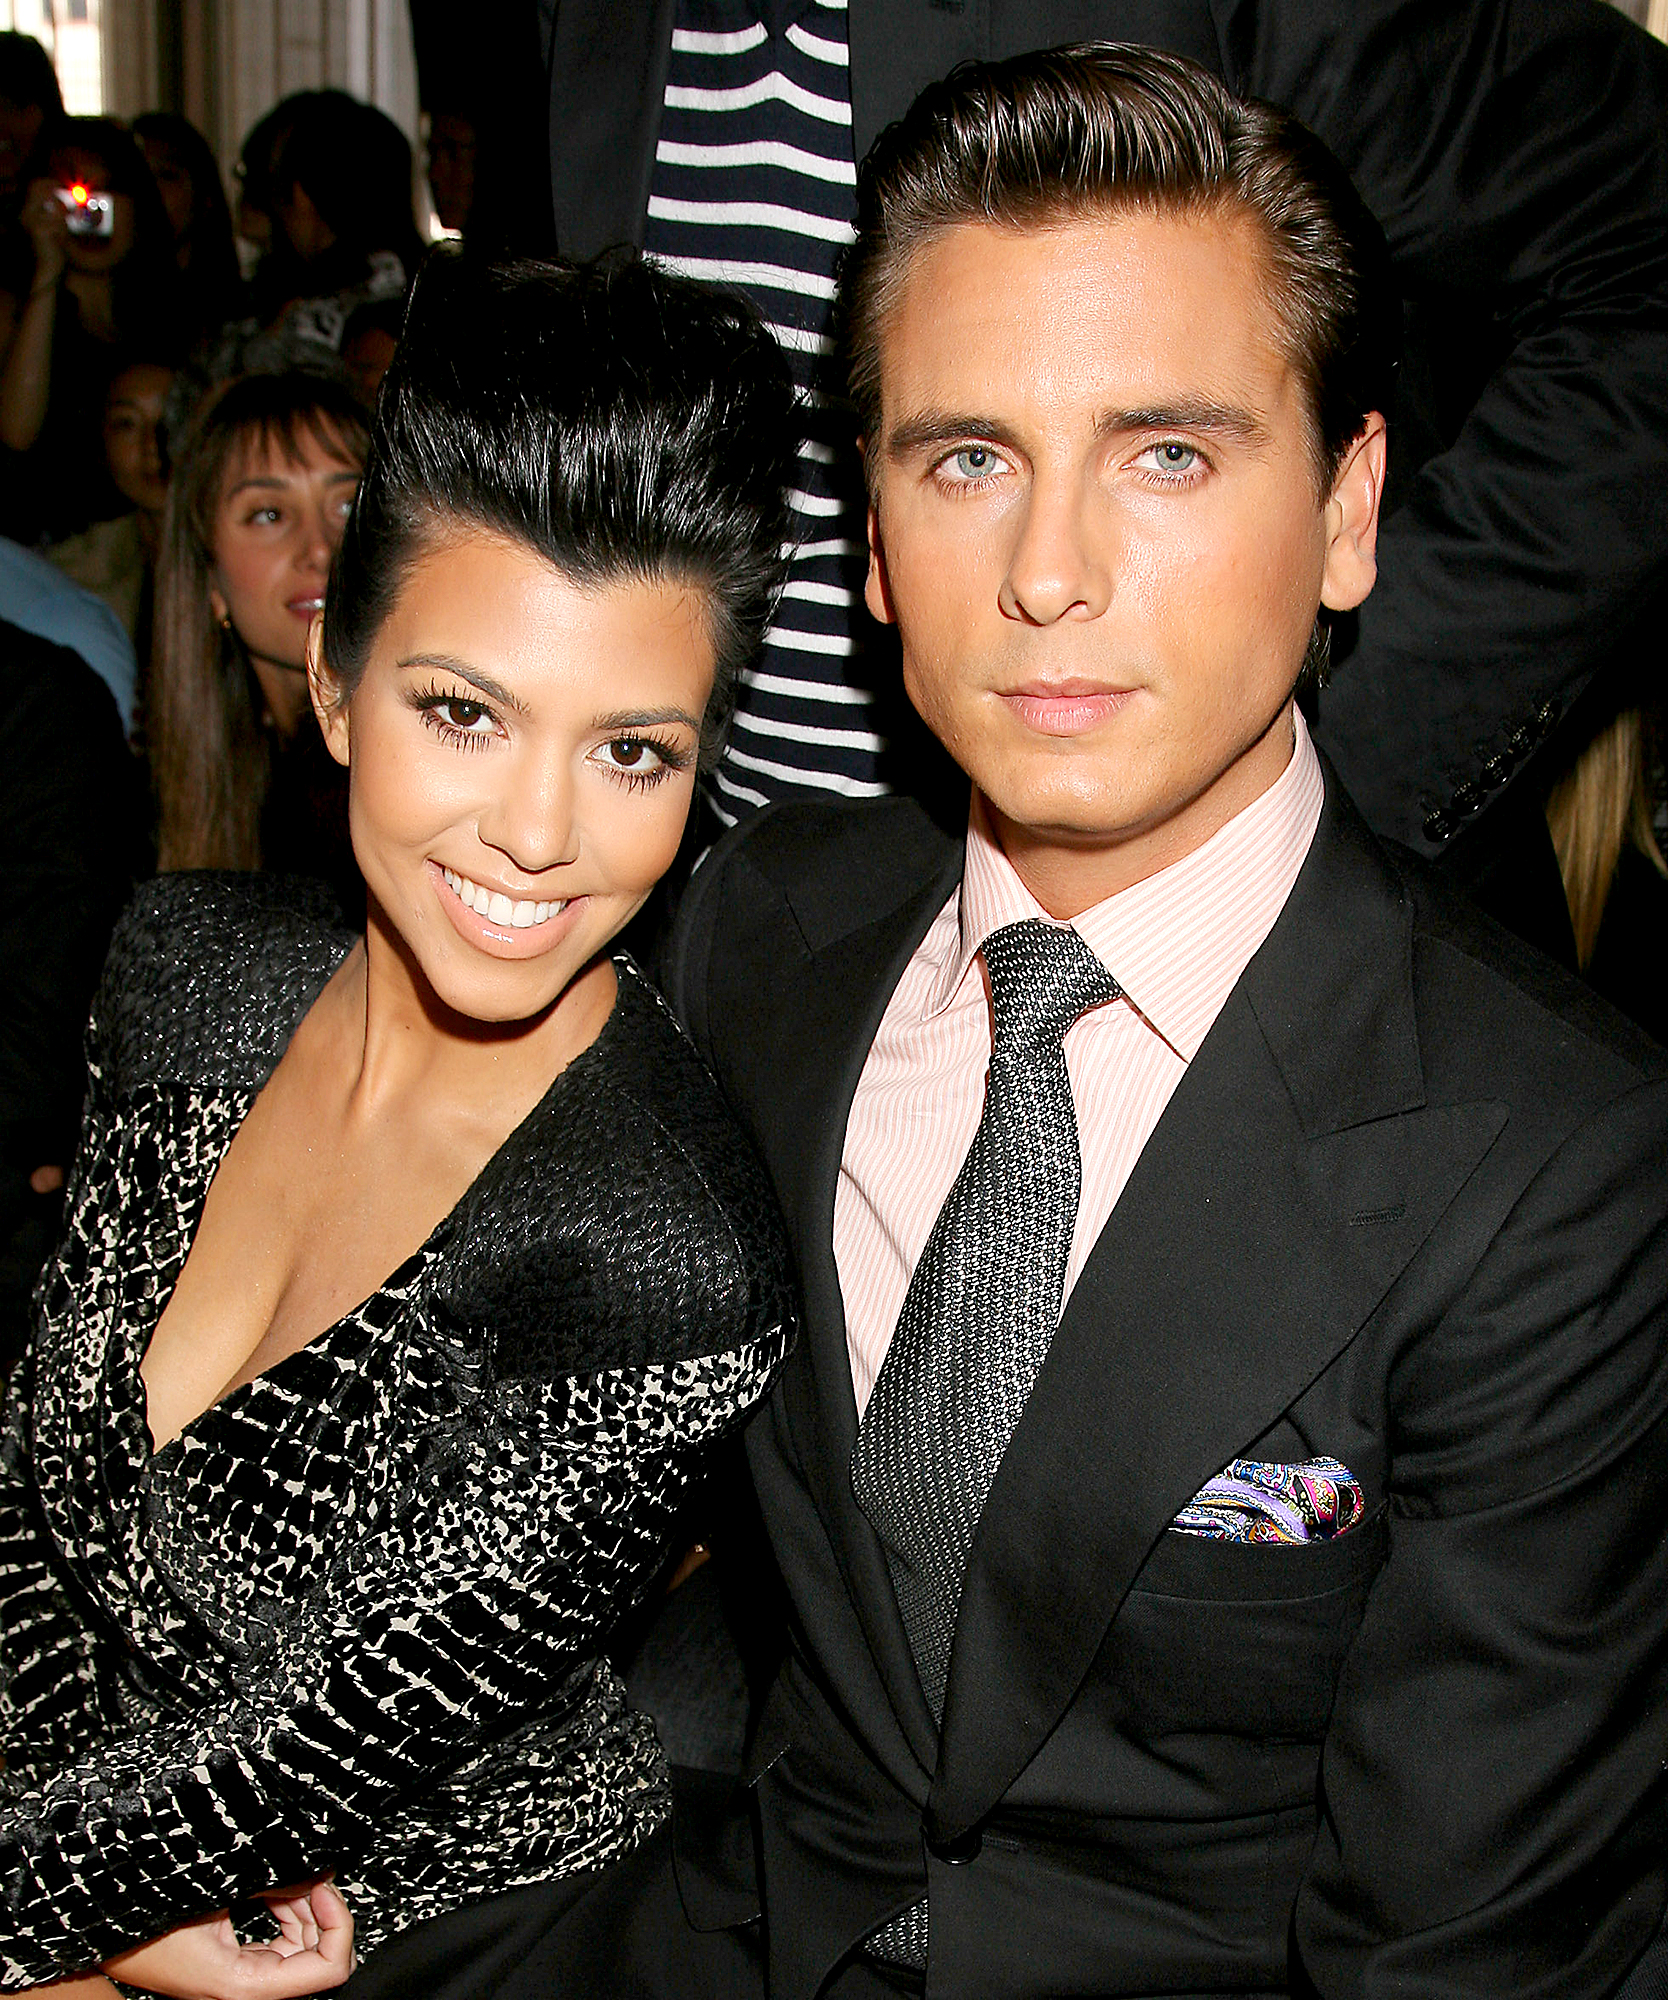 who was kourtney dating in 2020